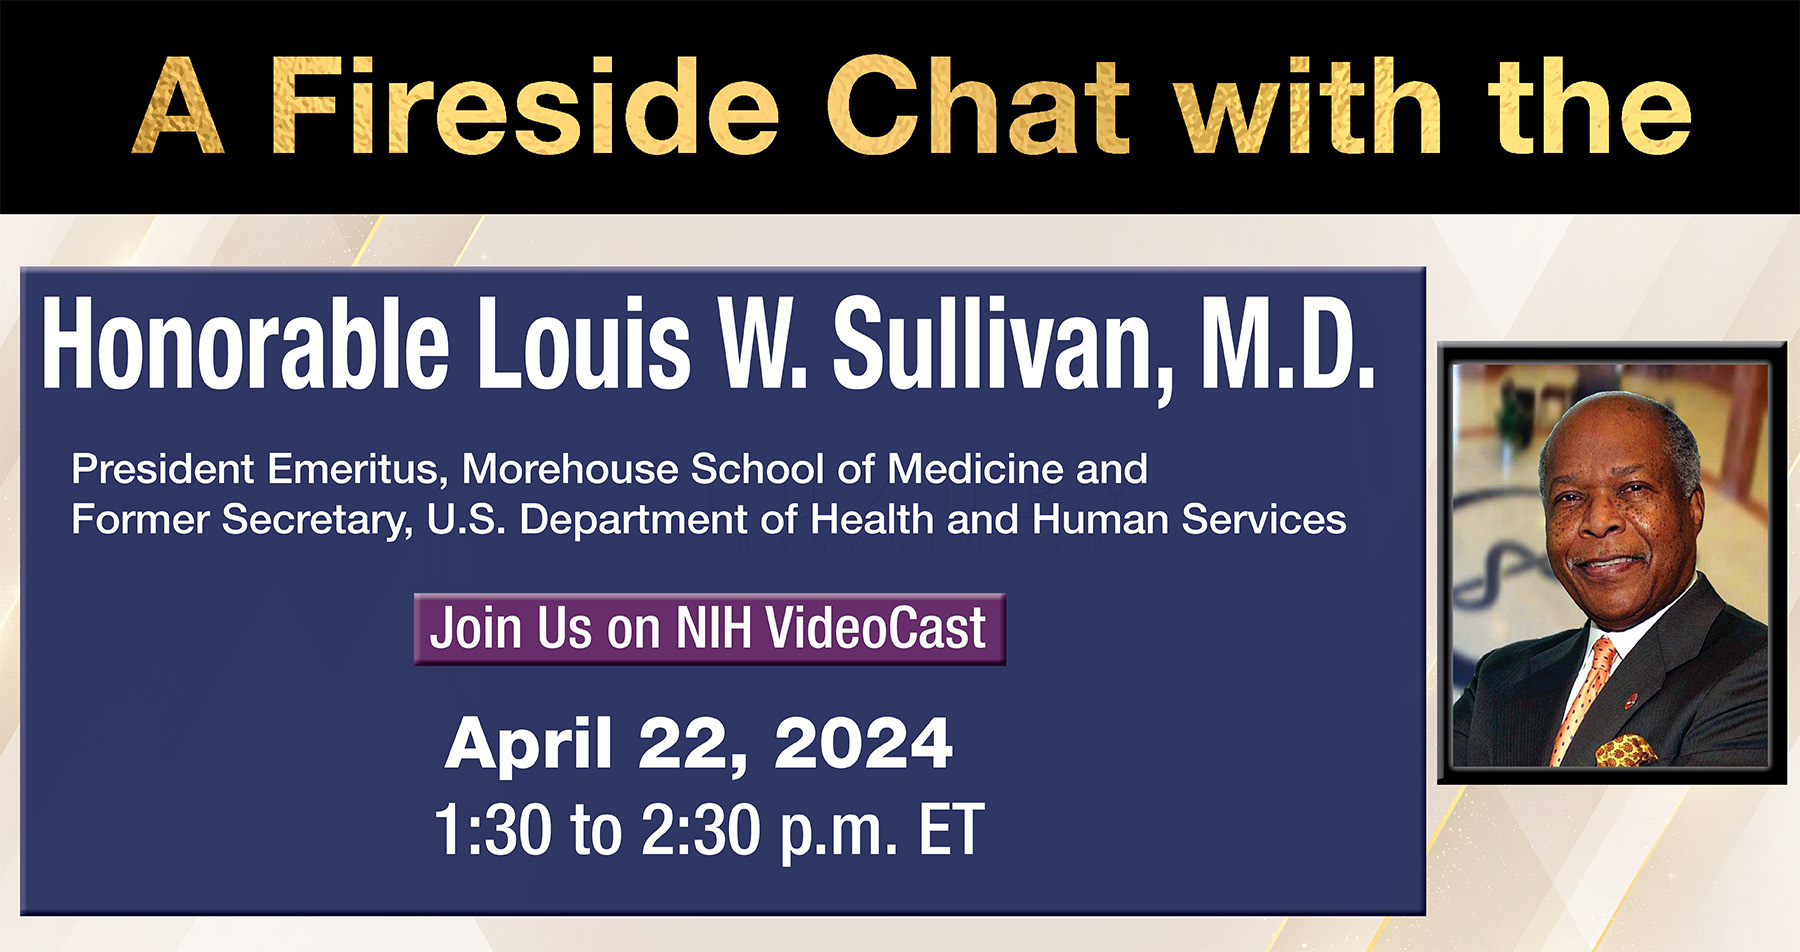 Fireside Chat With the Honorable Dr. Louis Sullivan, President Emeritus, Morehouse School of Medicine, former U.S. HHS Secretary, 1989-1993, April 2024